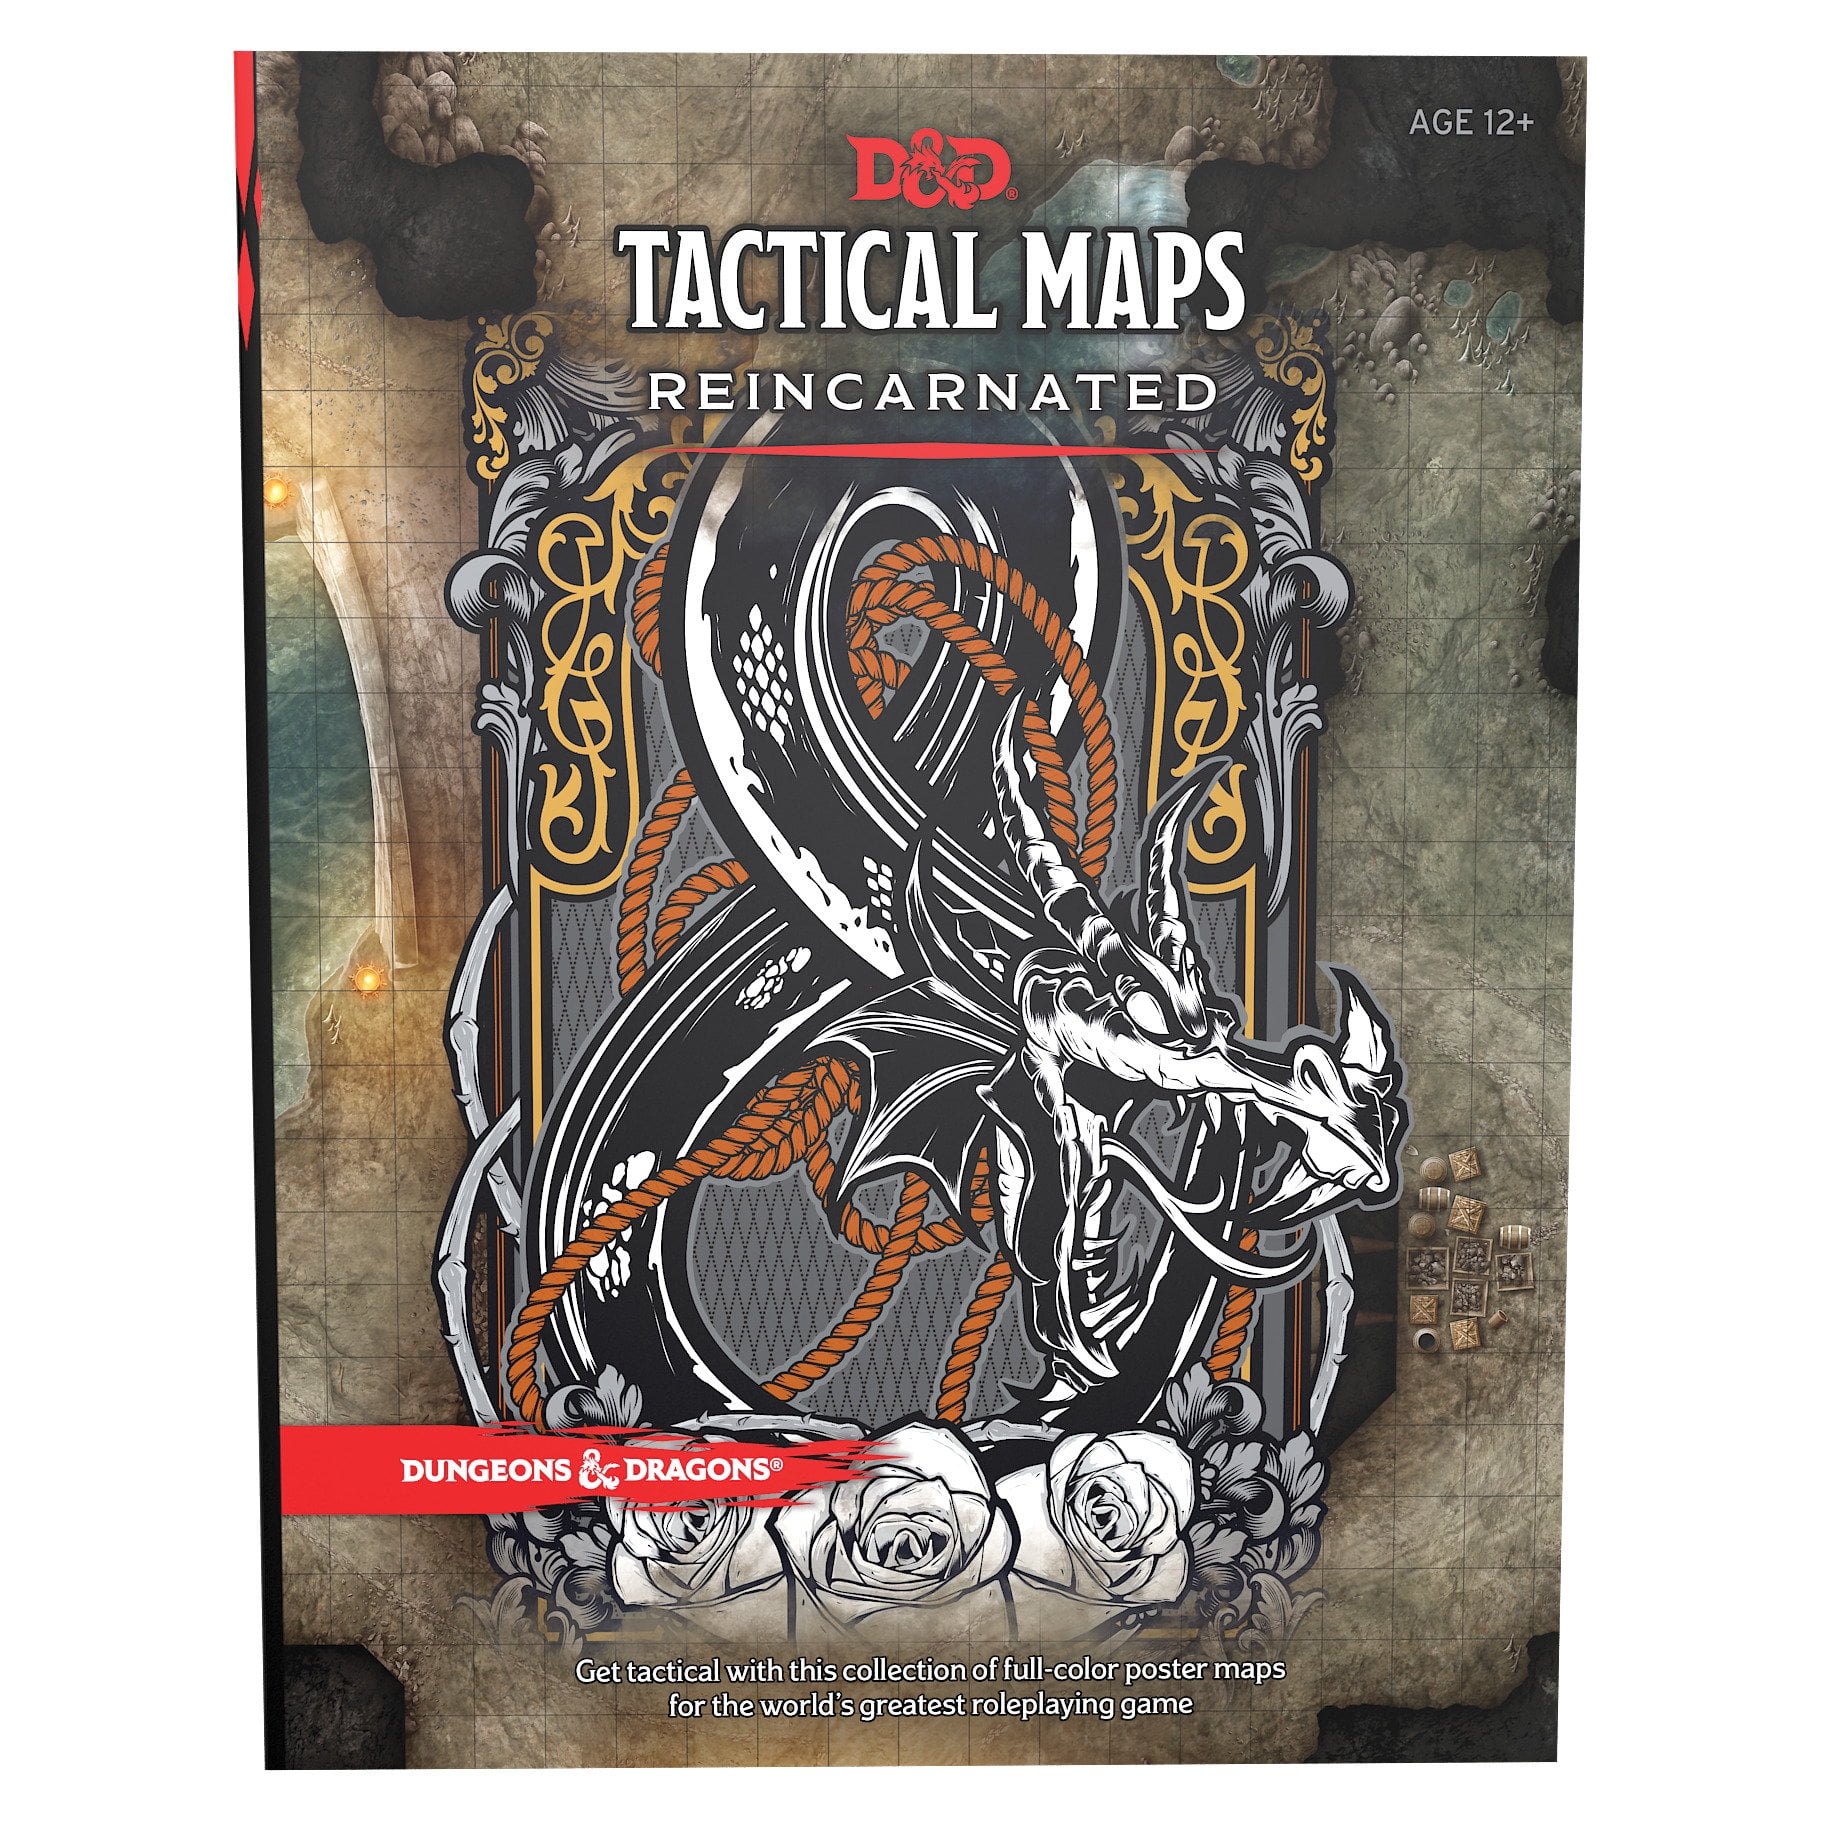 & Dragons: Dungeons & Dragons Tactical Maps Reincarnated (D&d Accessory) (Other) - Walmart.com